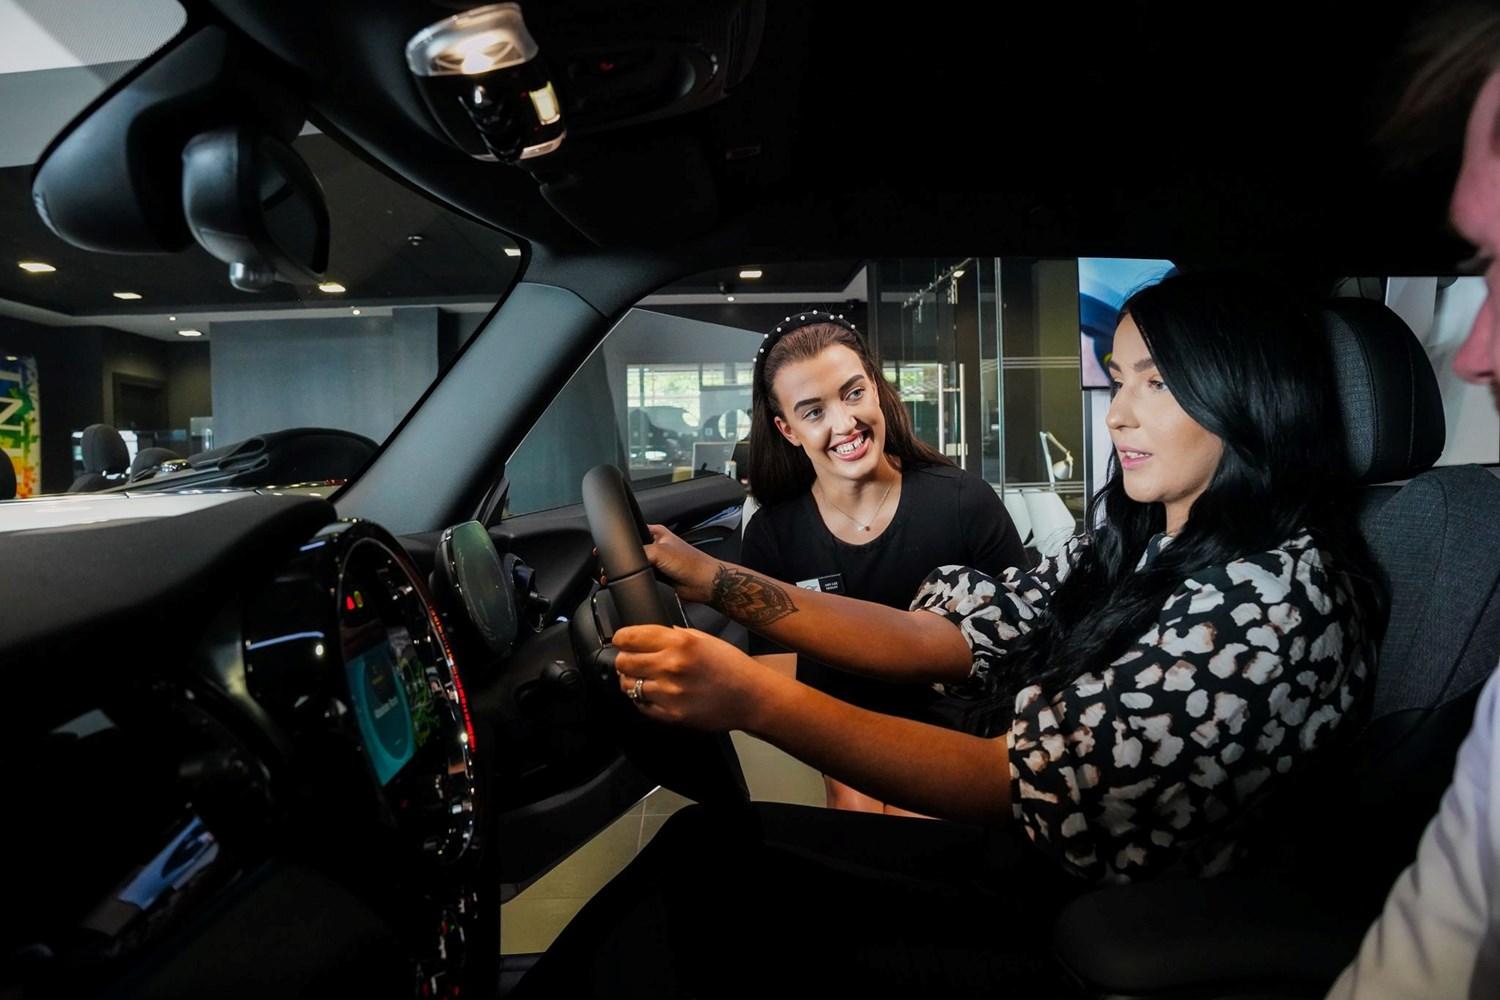 MINI Sales Specialist speaks to customers about the key features of the MINI Countryman interior as they sit inside of the vehicle at the Bavarian MINI Showroom